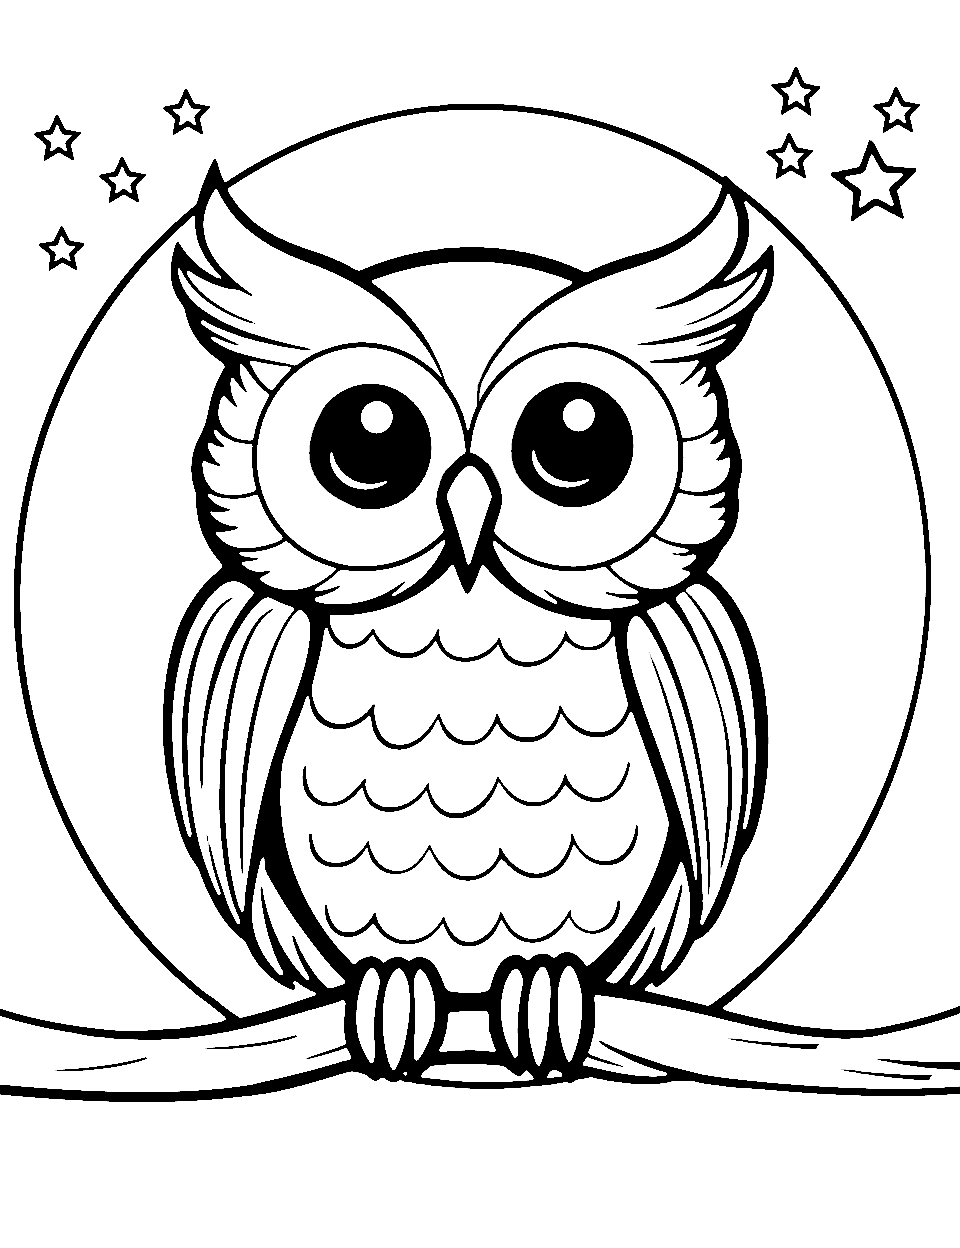 Owl under the Stars Coloring Page - An owl under a starry night sky.